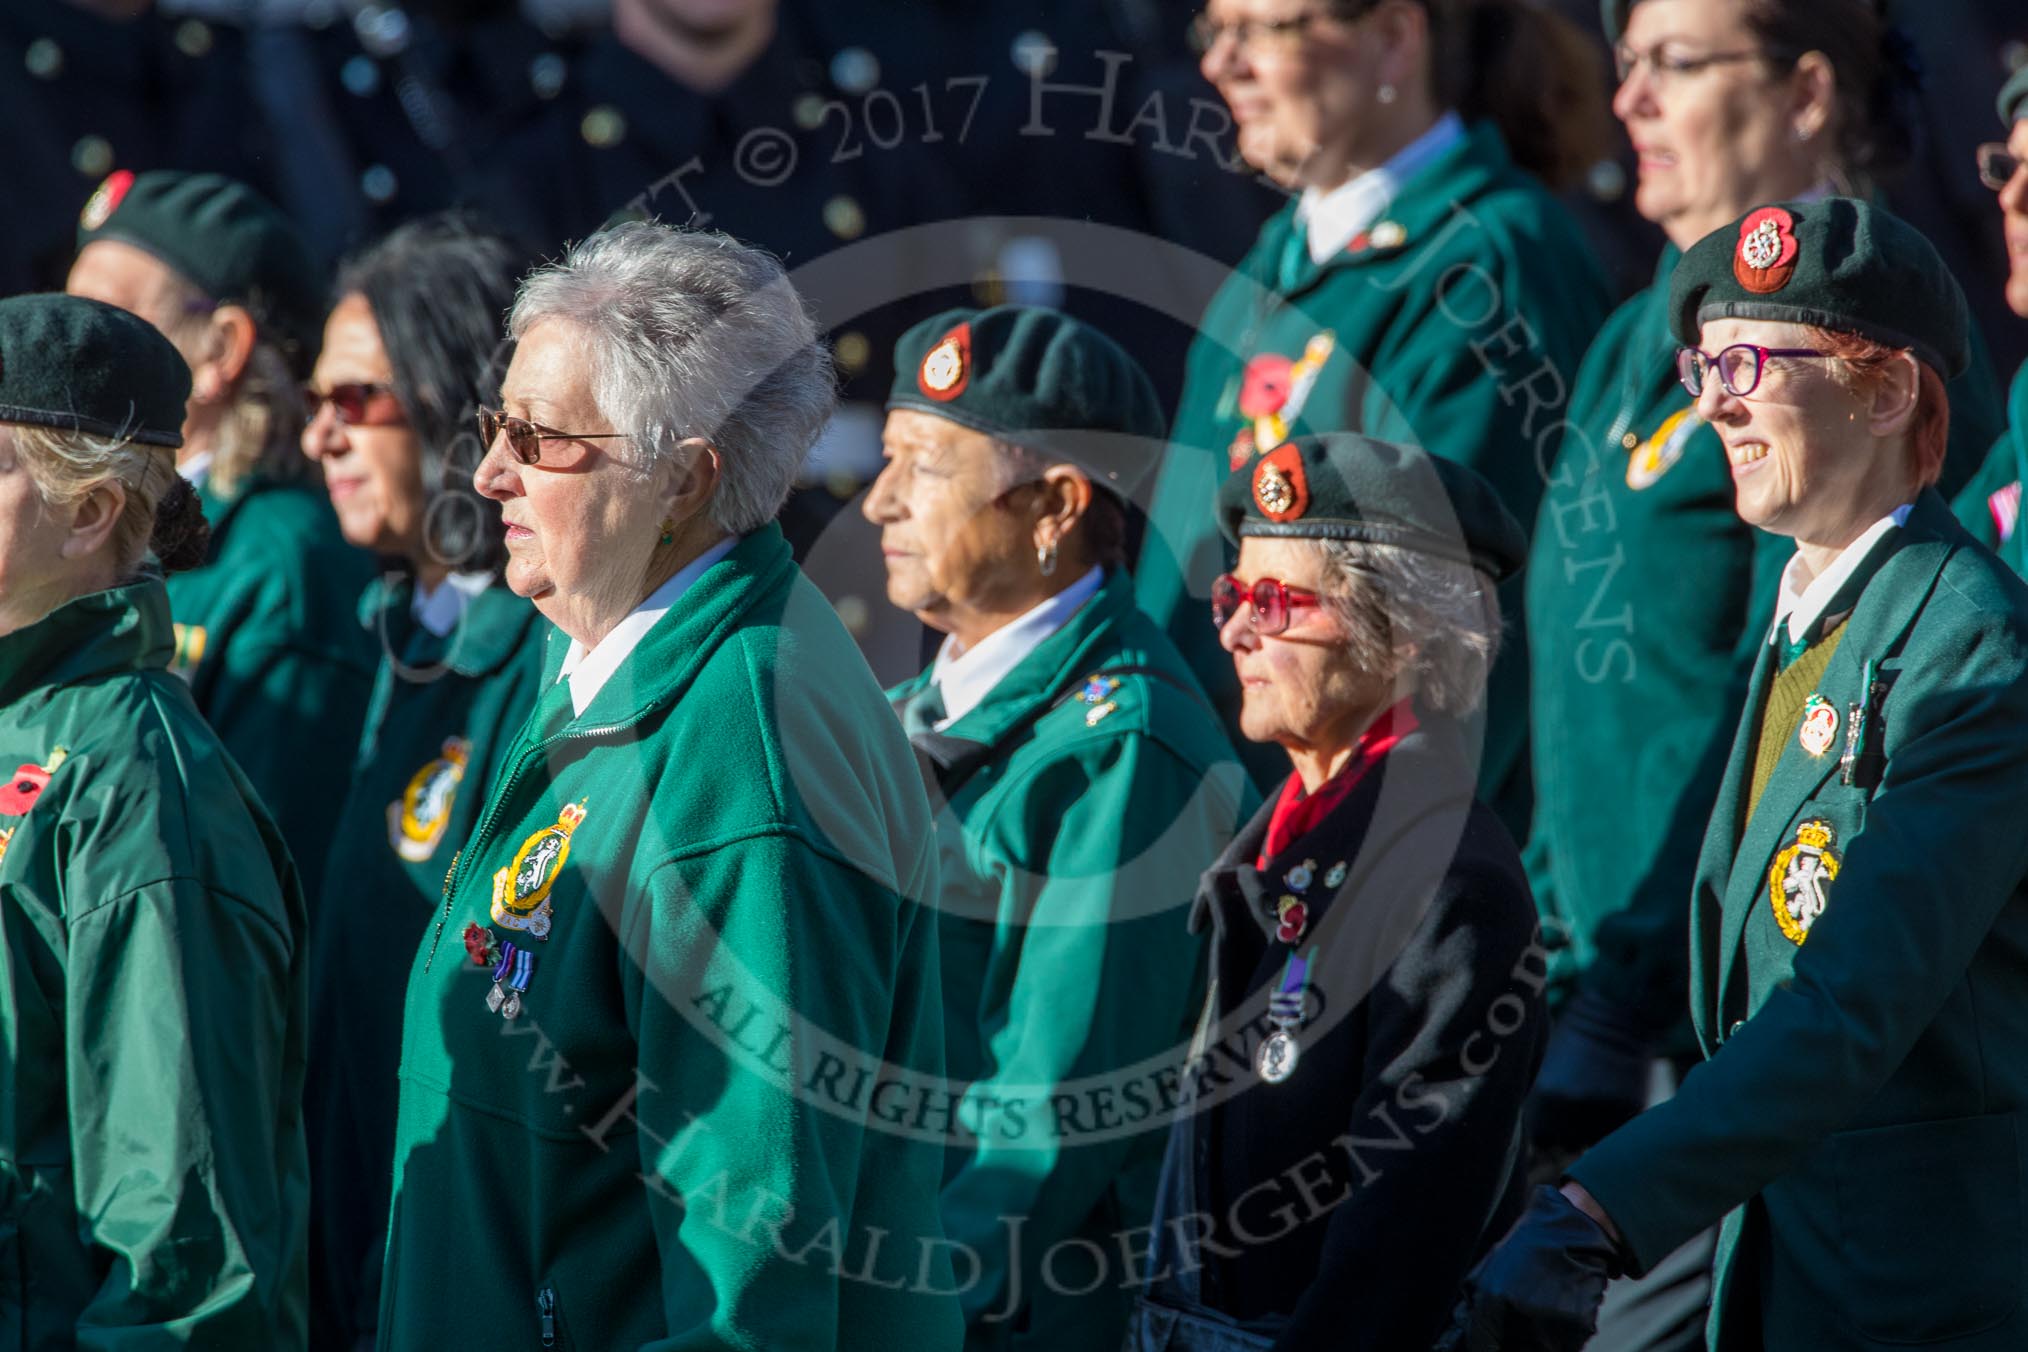 WRAC Association (Group B40, 95 members) during the Royal British Legion March Past on Remembrance Sunday at the Cenotaph, Whitehall, Westminster, London, 11 November 2018, 12:13.